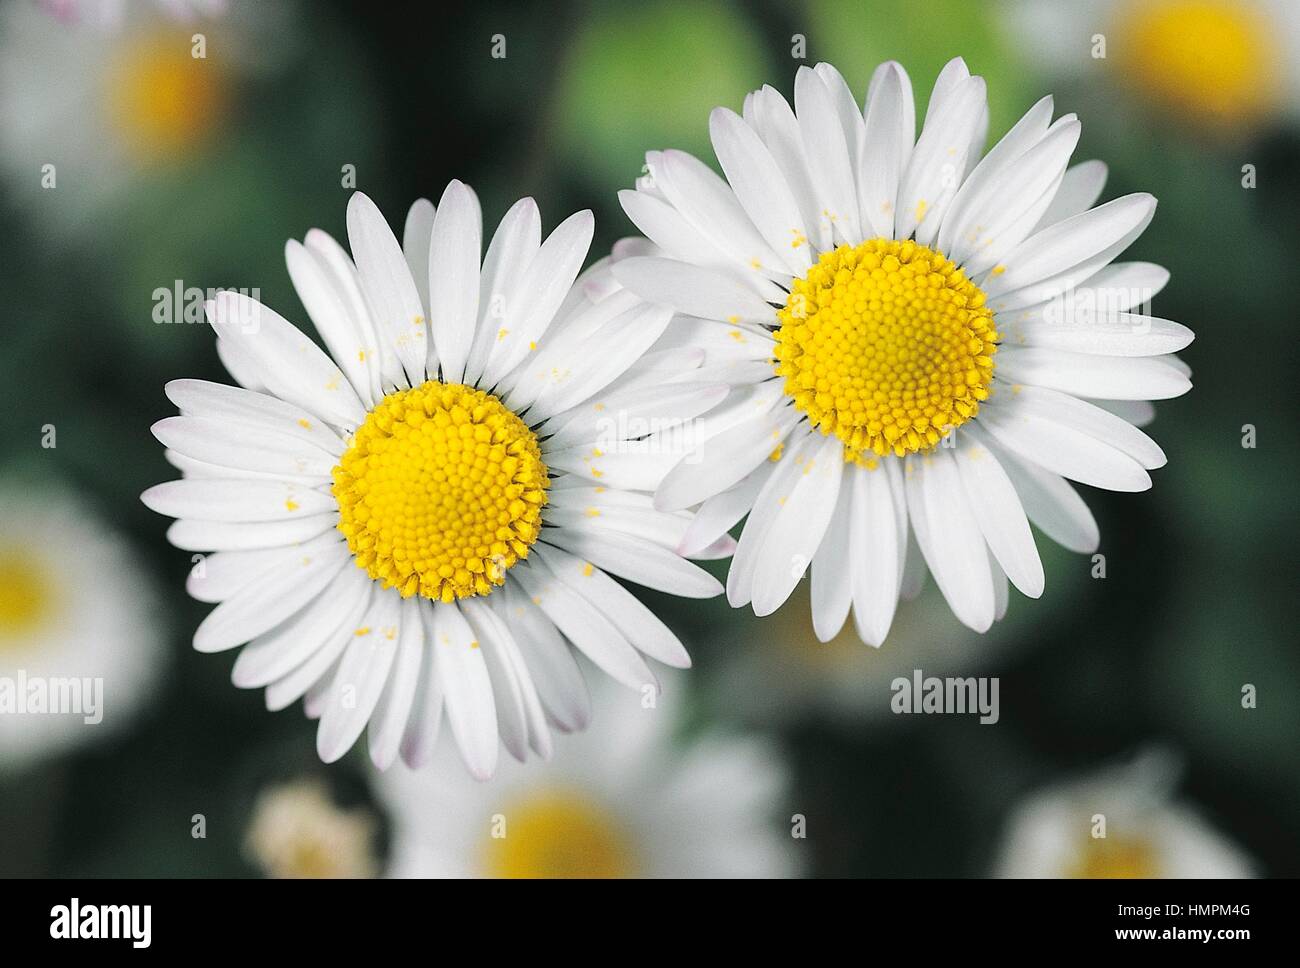 Lawn daisy or English daisy (Bellis perennis), Asteraceae. Stock Photo